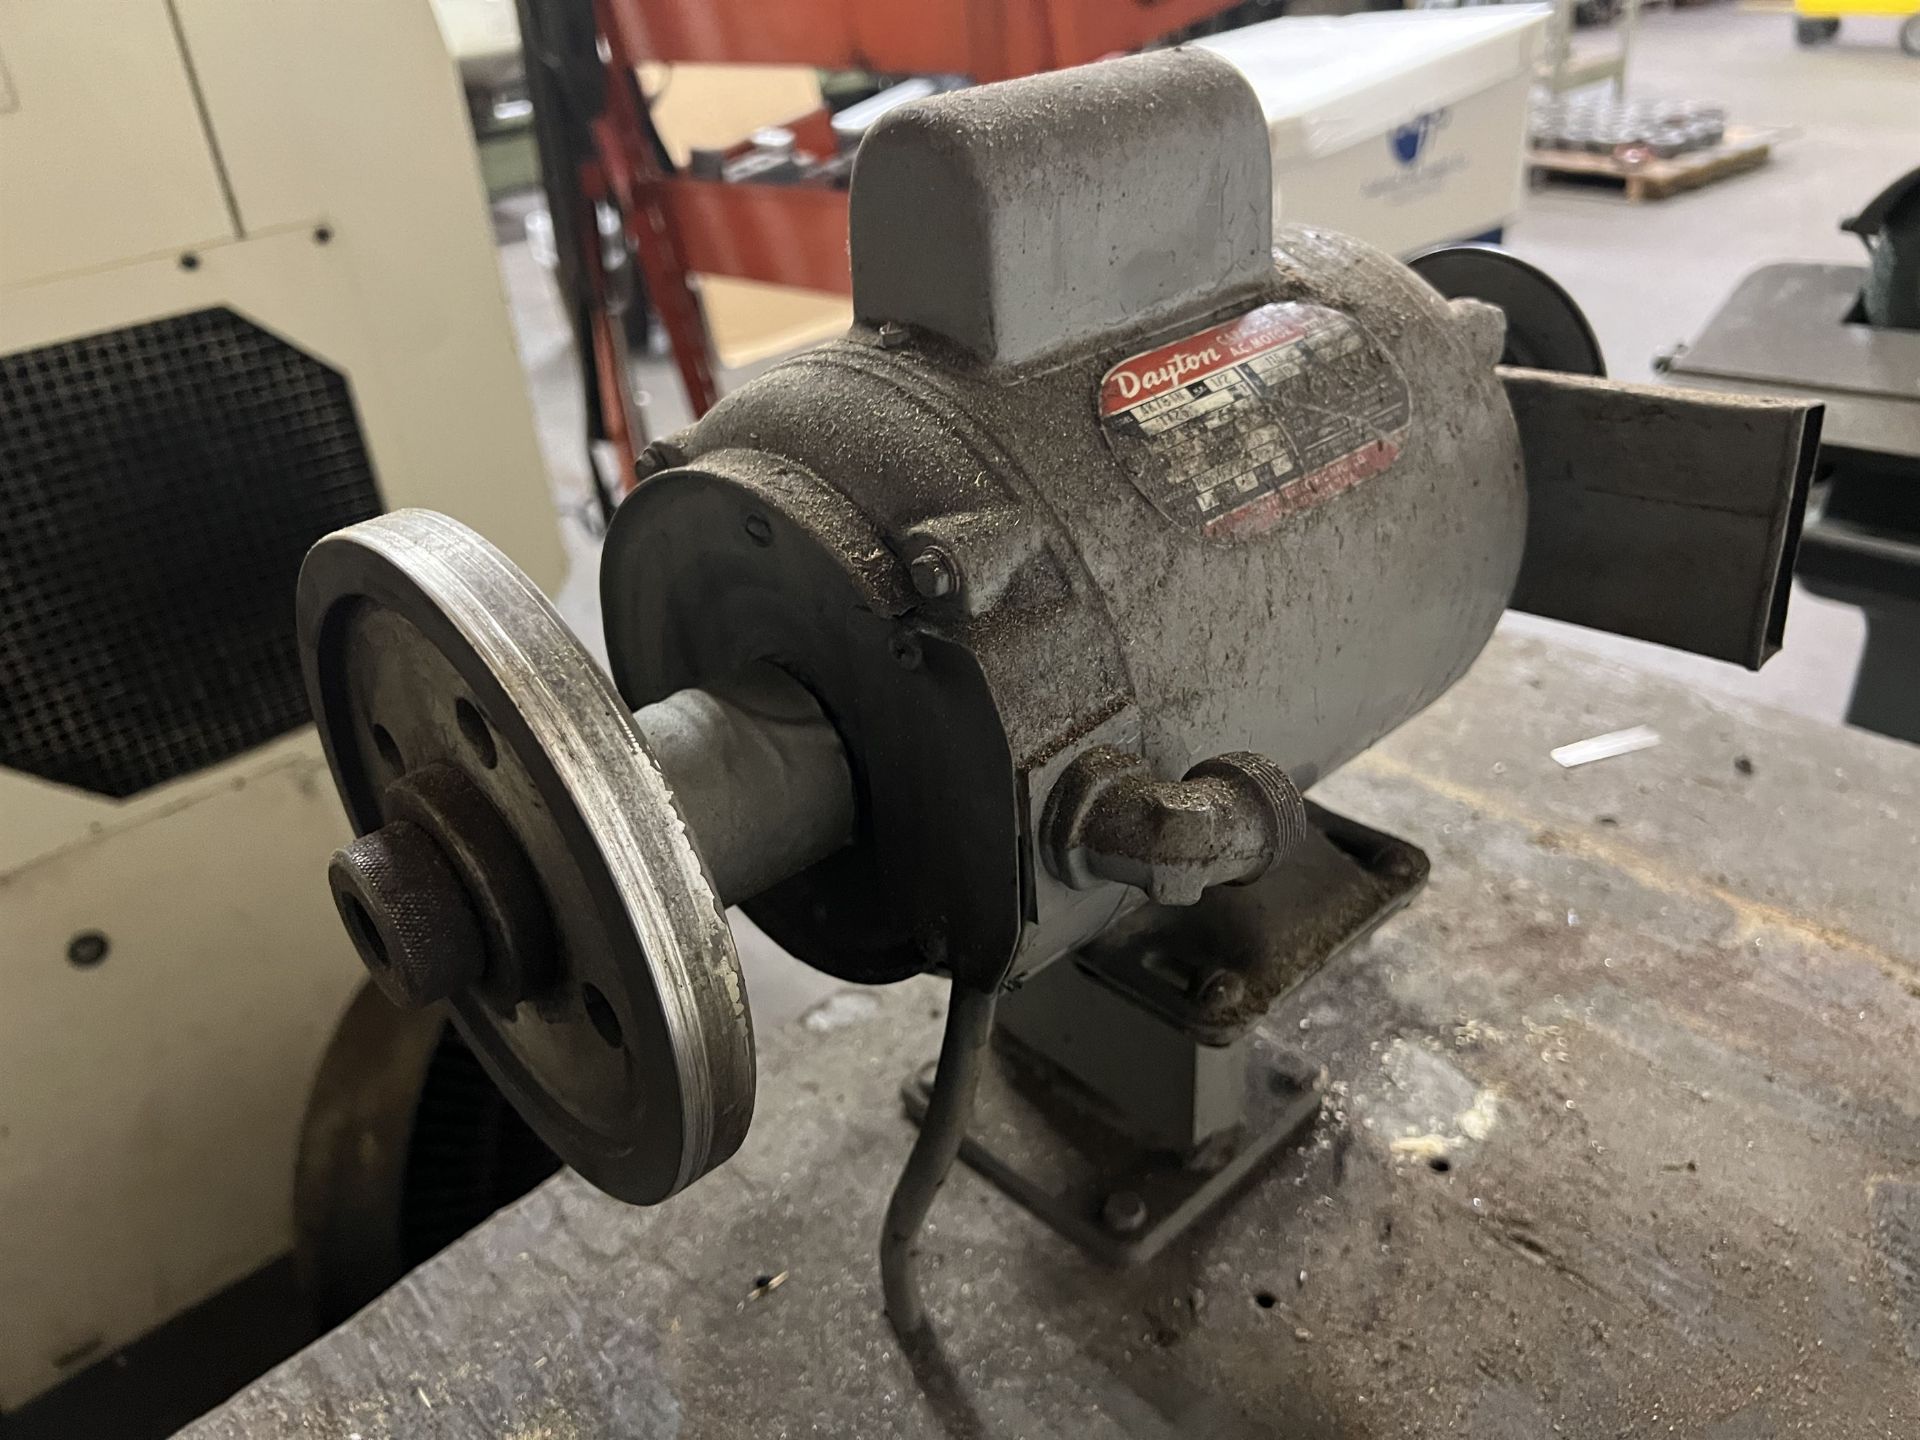 DAYTON 4K781N Bench Grinder, 1/2 HP, 1725 RPM, Mounted on Work Bench (This lot is located at 1935 W. - Image 3 of 4